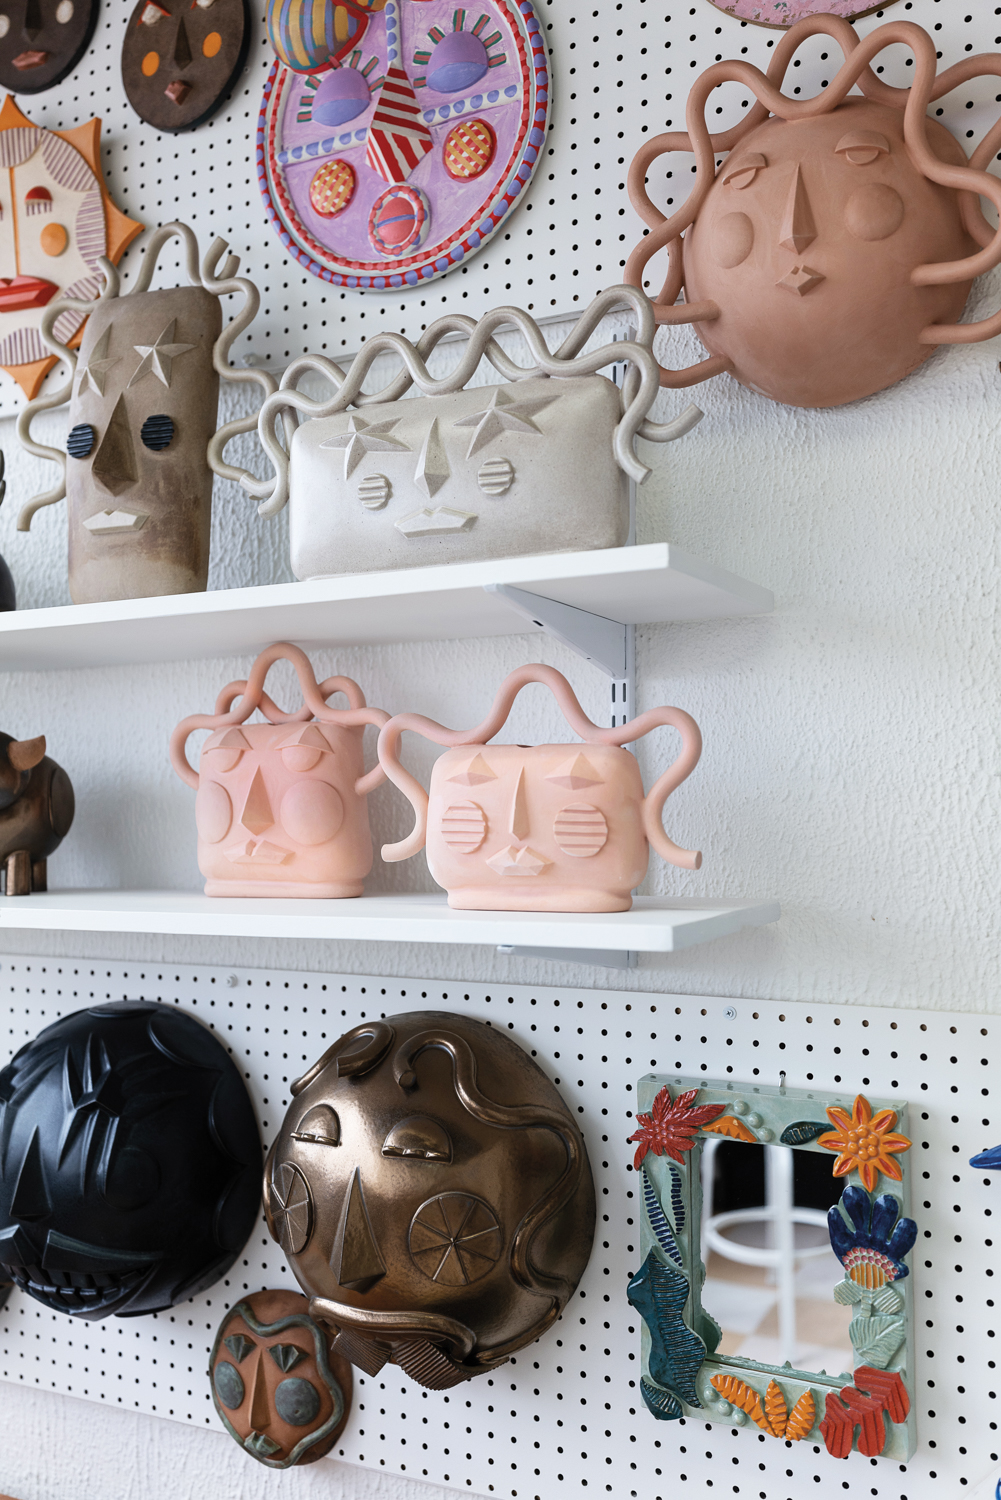 Shelves lined with whimsical face vessels in various colors